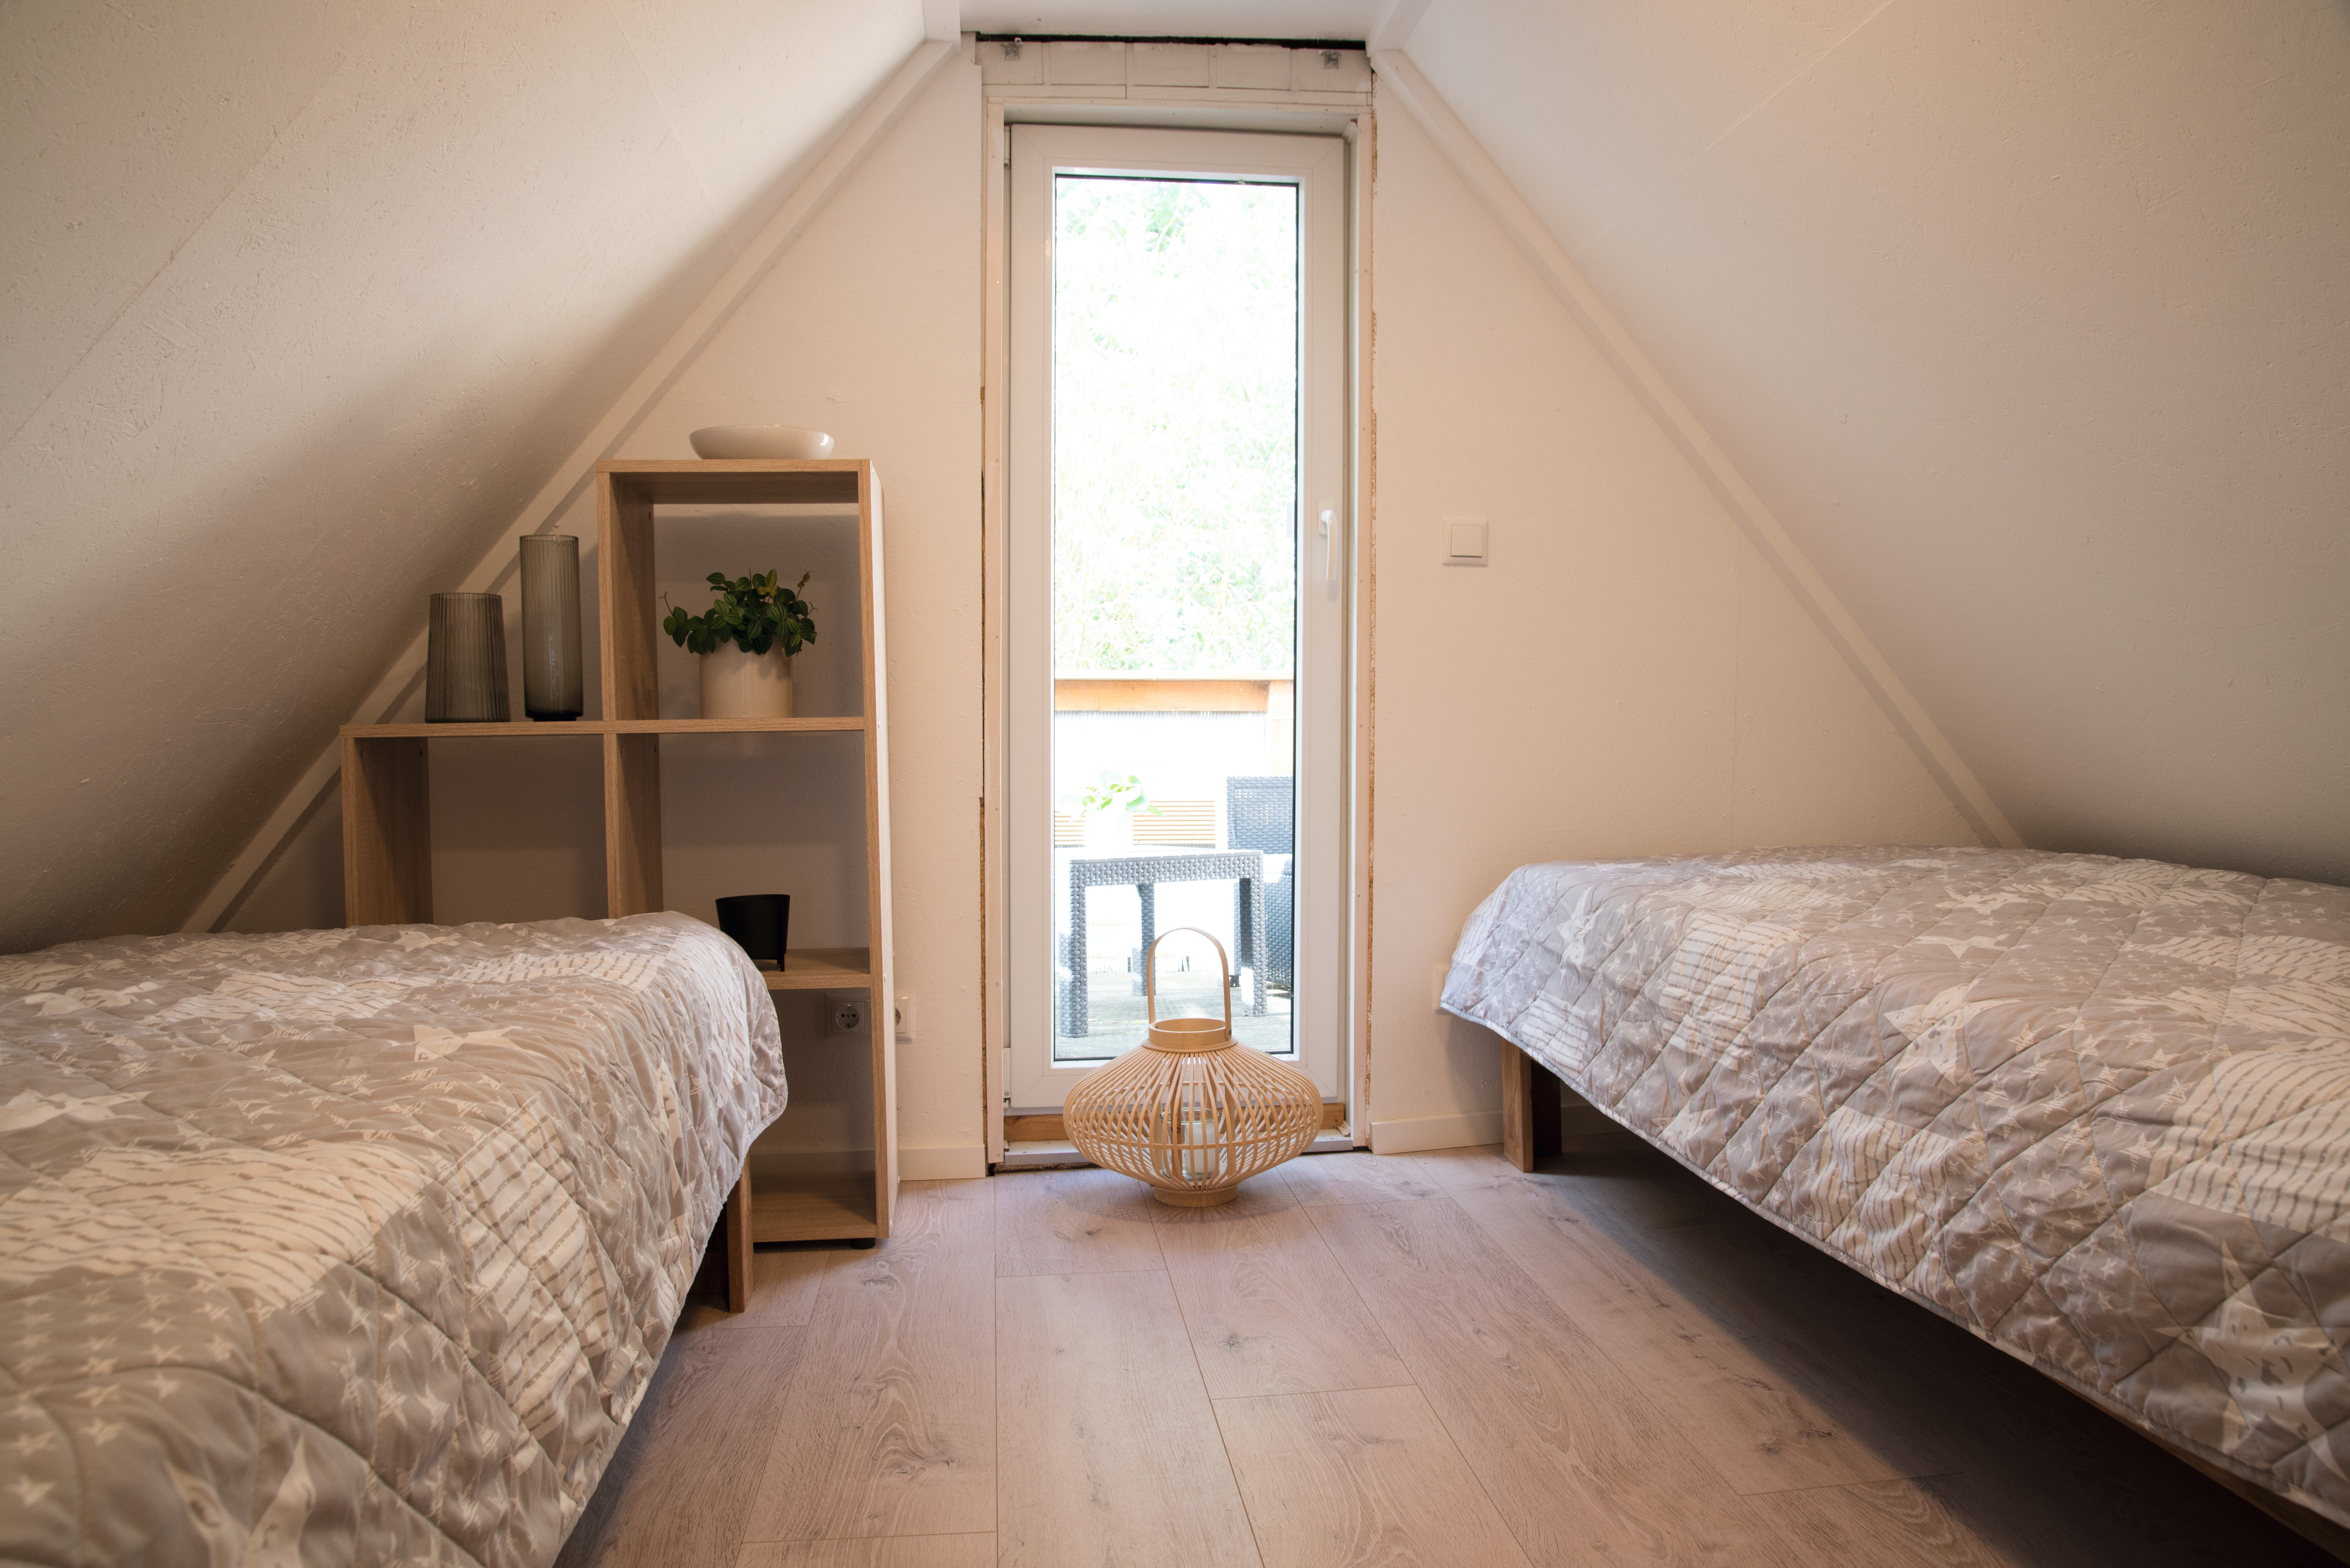 The practically equipped bedroom in the attic appears more spacious than it is due to the light colour decor EPC026.